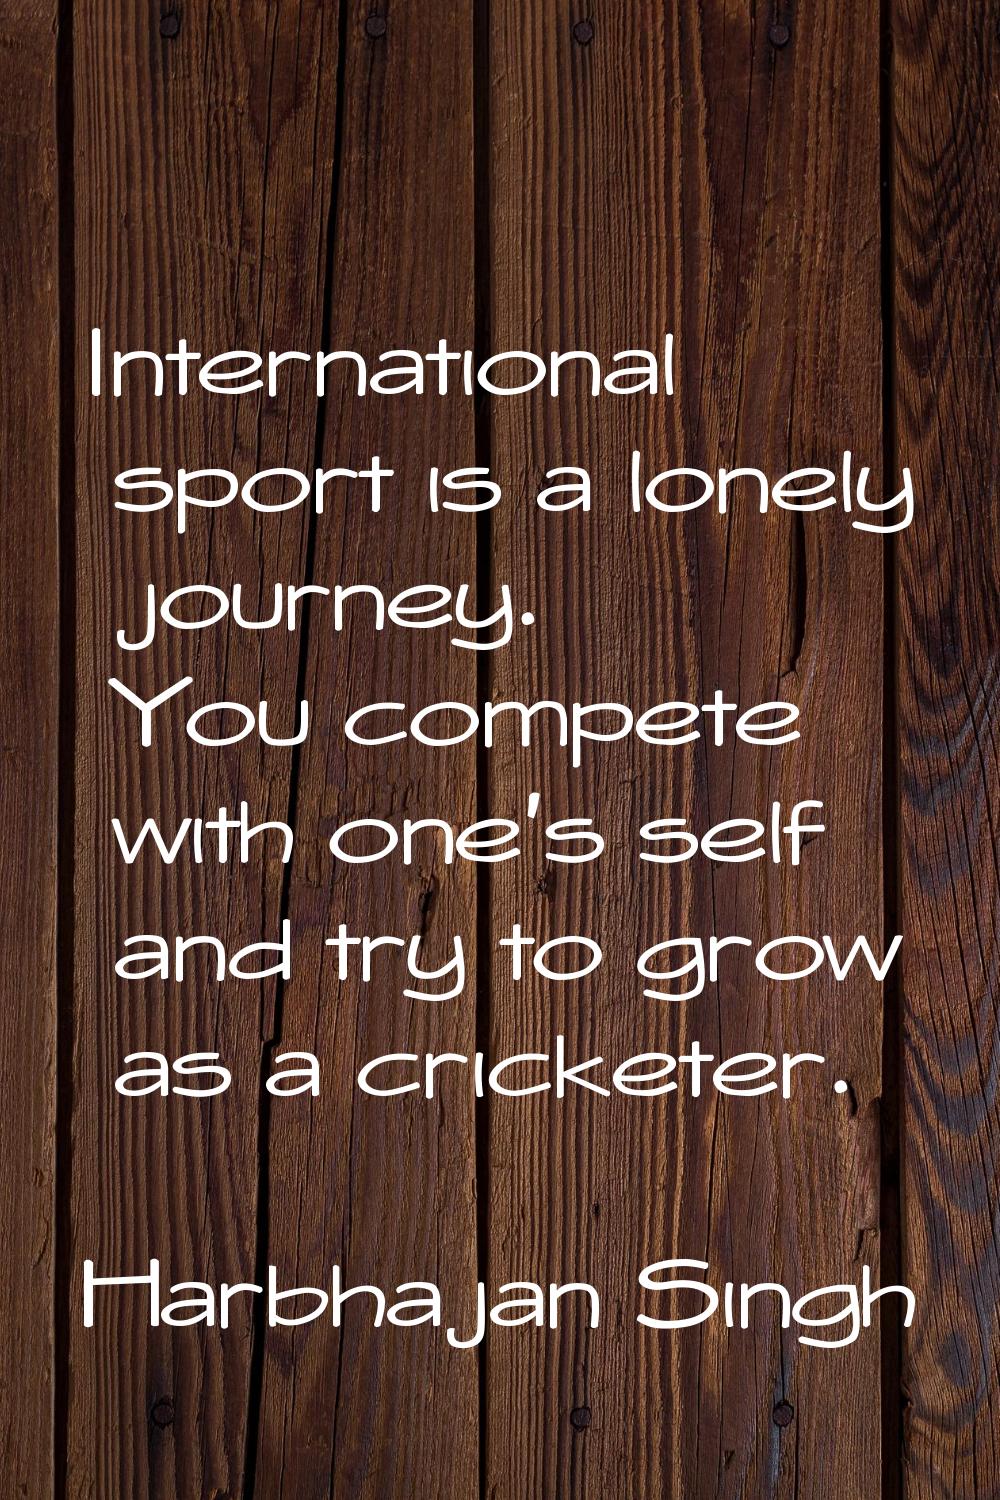 International sport is a lonely journey. You compete with one's self and try to grow as a cricketer